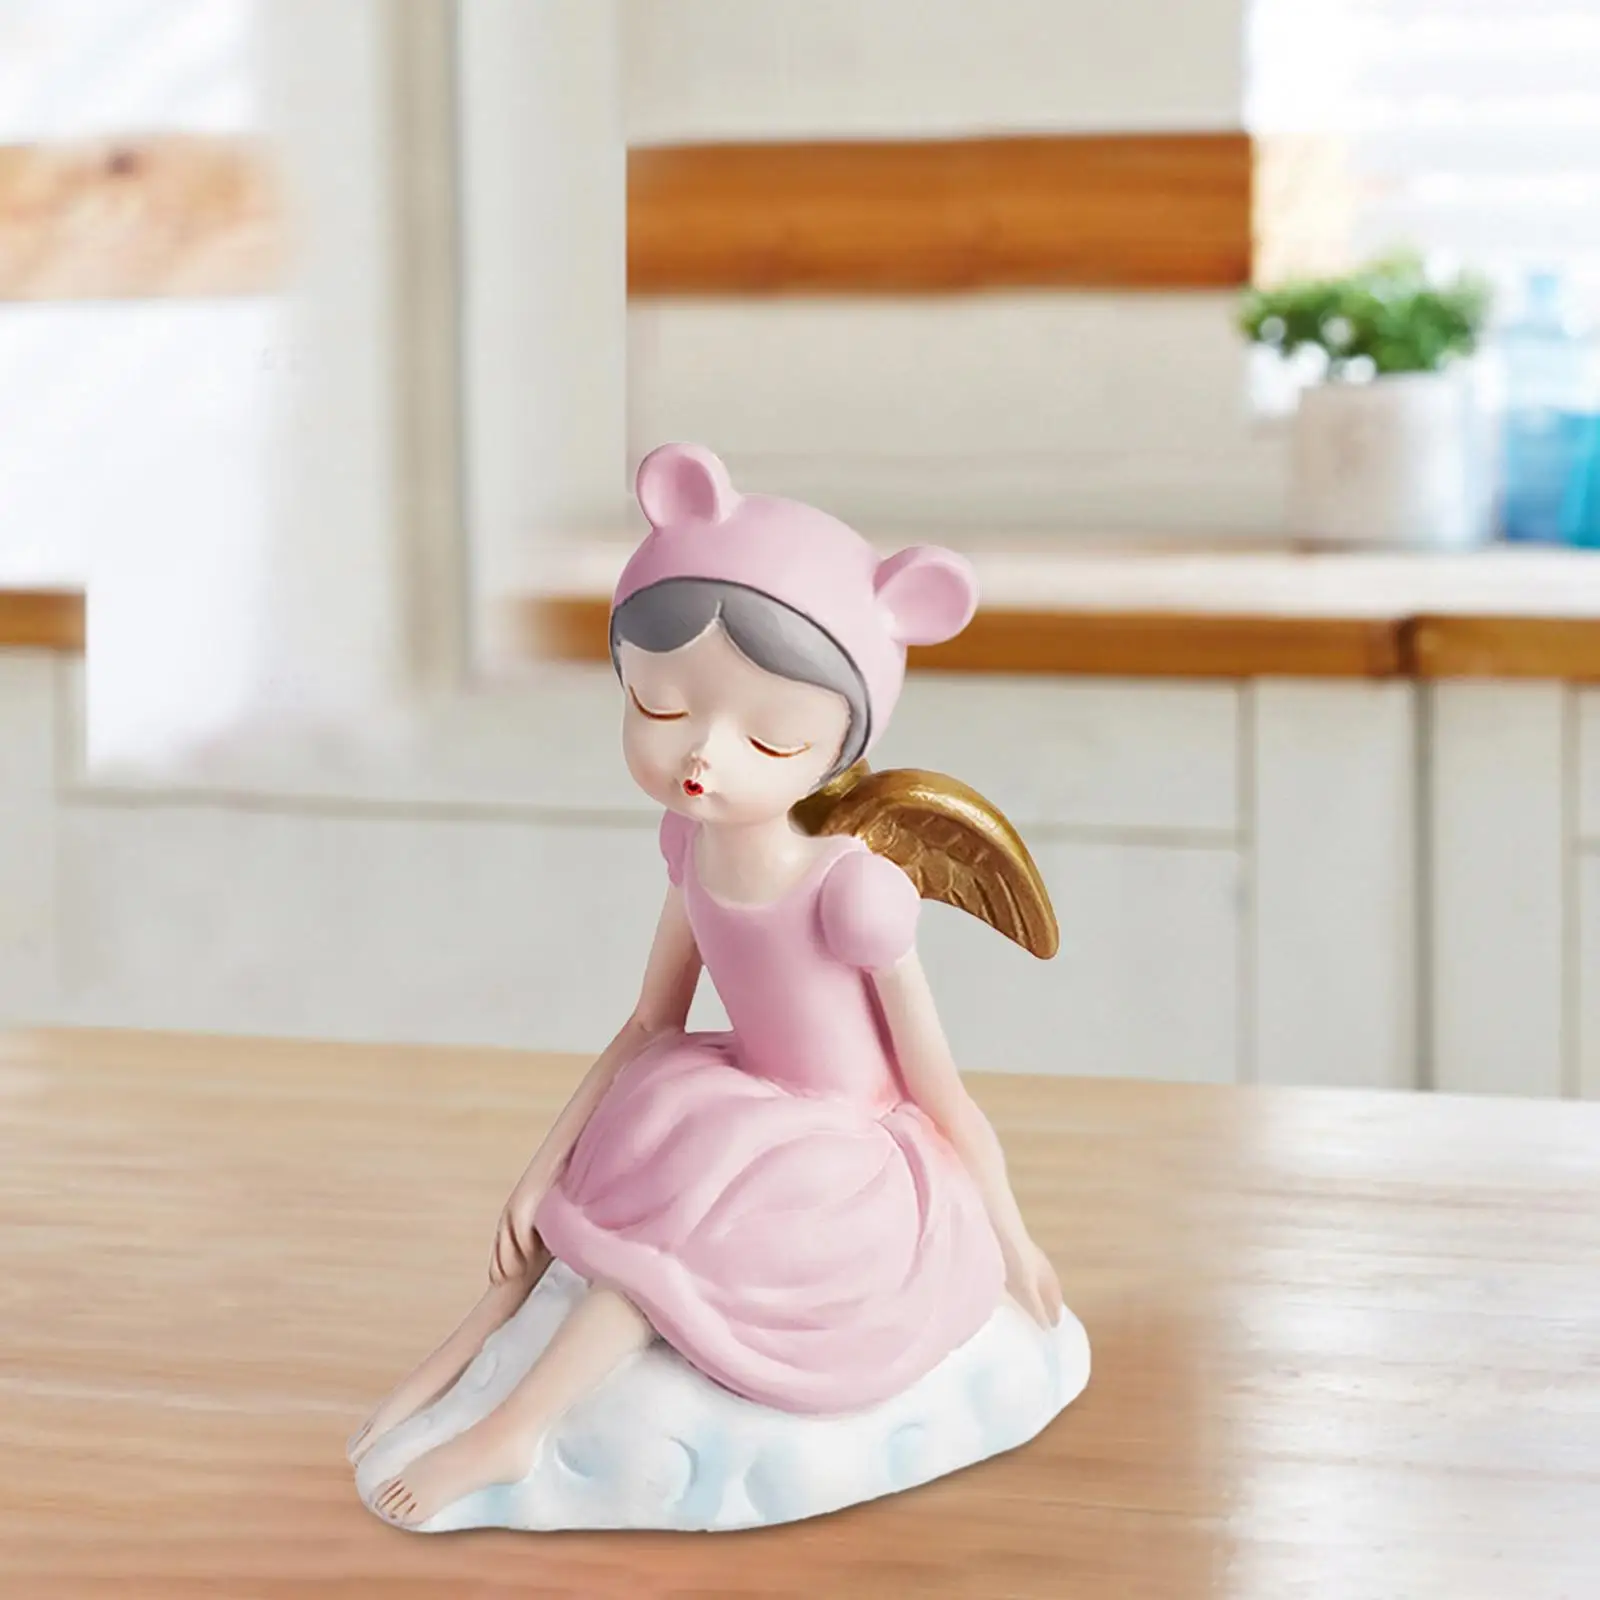 Modern Girl Statue Table Ornament Craft Collectible Resin Creative Art Figurine for Bedroom Cabinet Party Entrance Gift